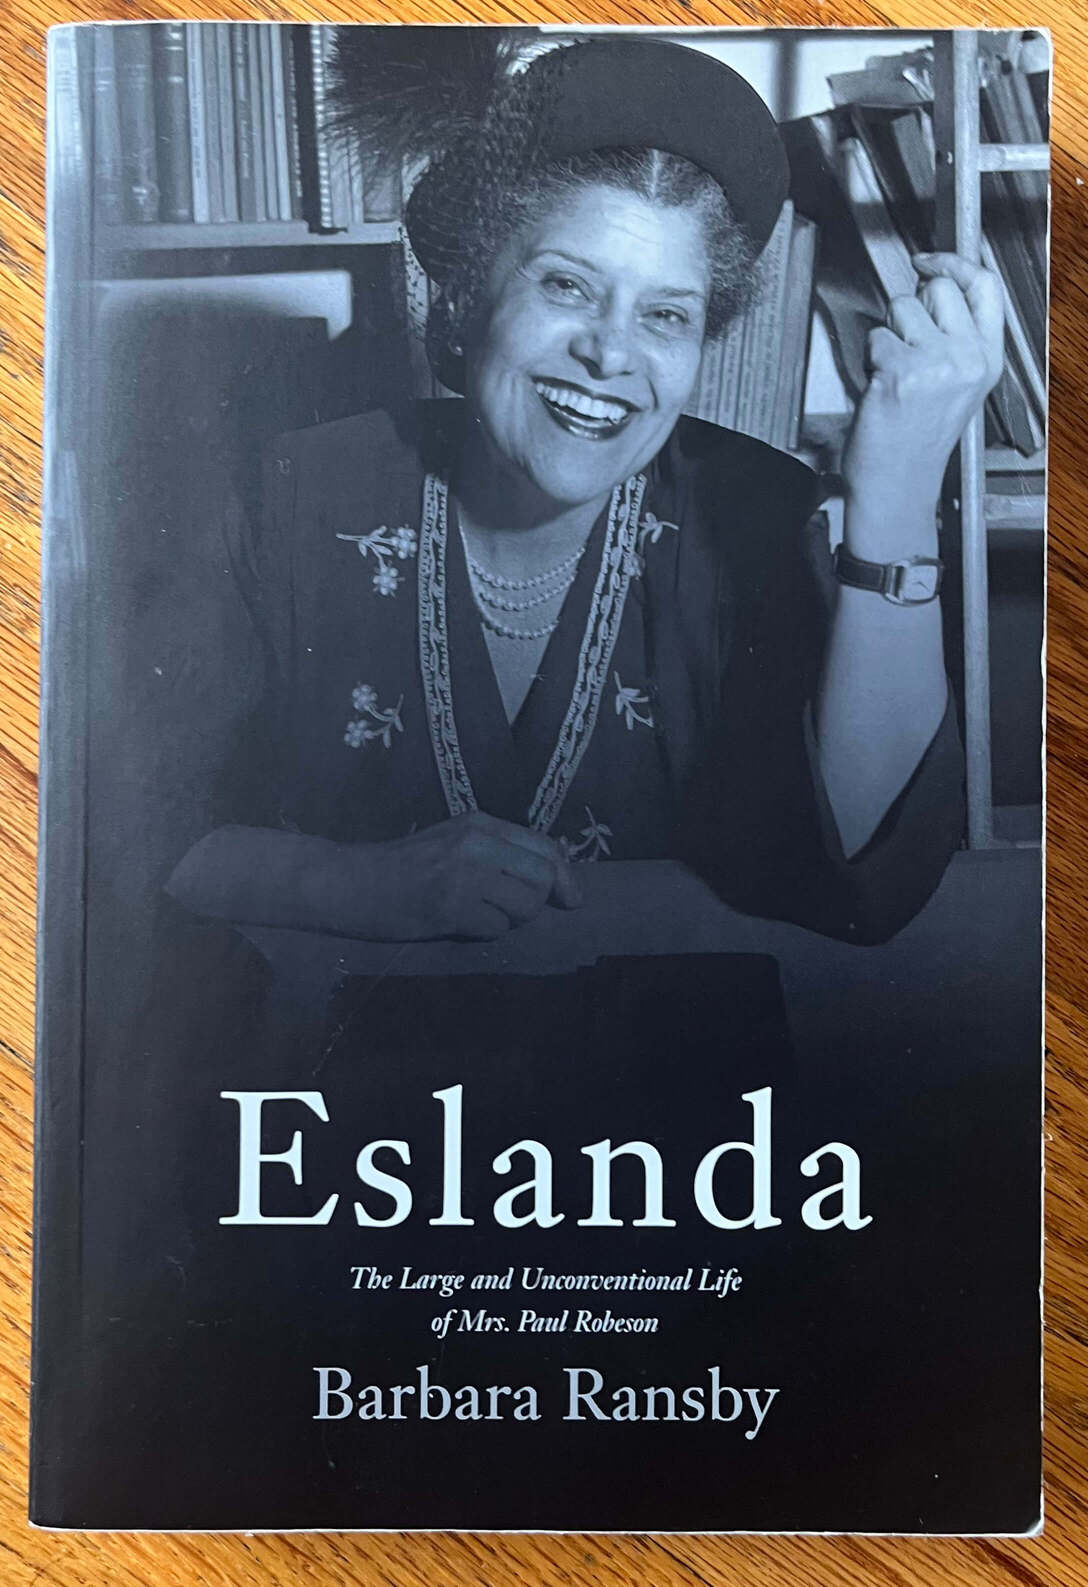 “Eslanda: The Large and Unconventional Life of Mrs. Paul Robeson” by Barbara Ransby.